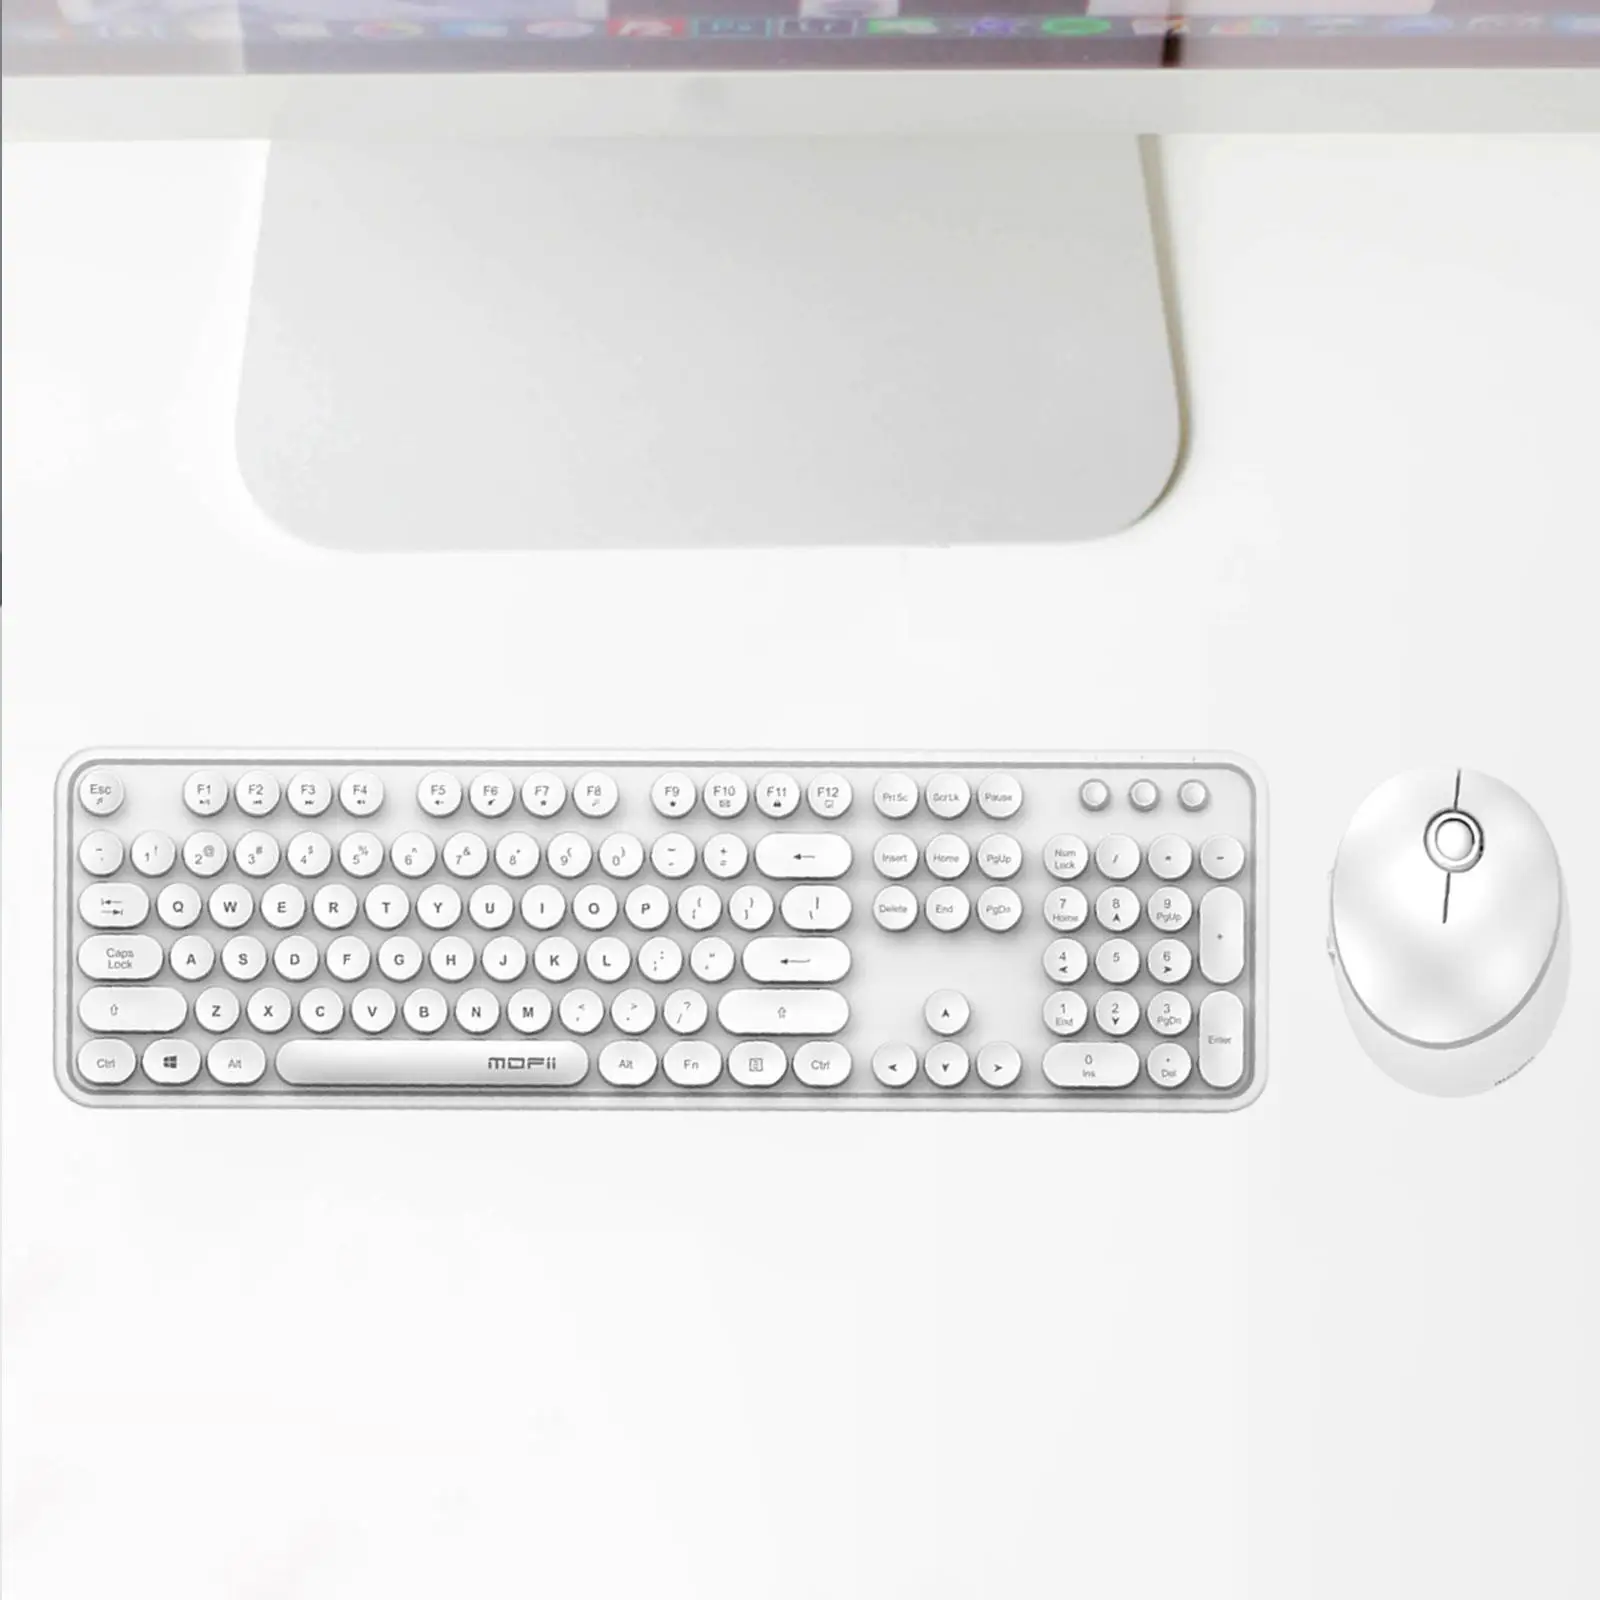 Fashion Desktop Mini Wireless Keyboard with Mouse Comb, with Number Pad